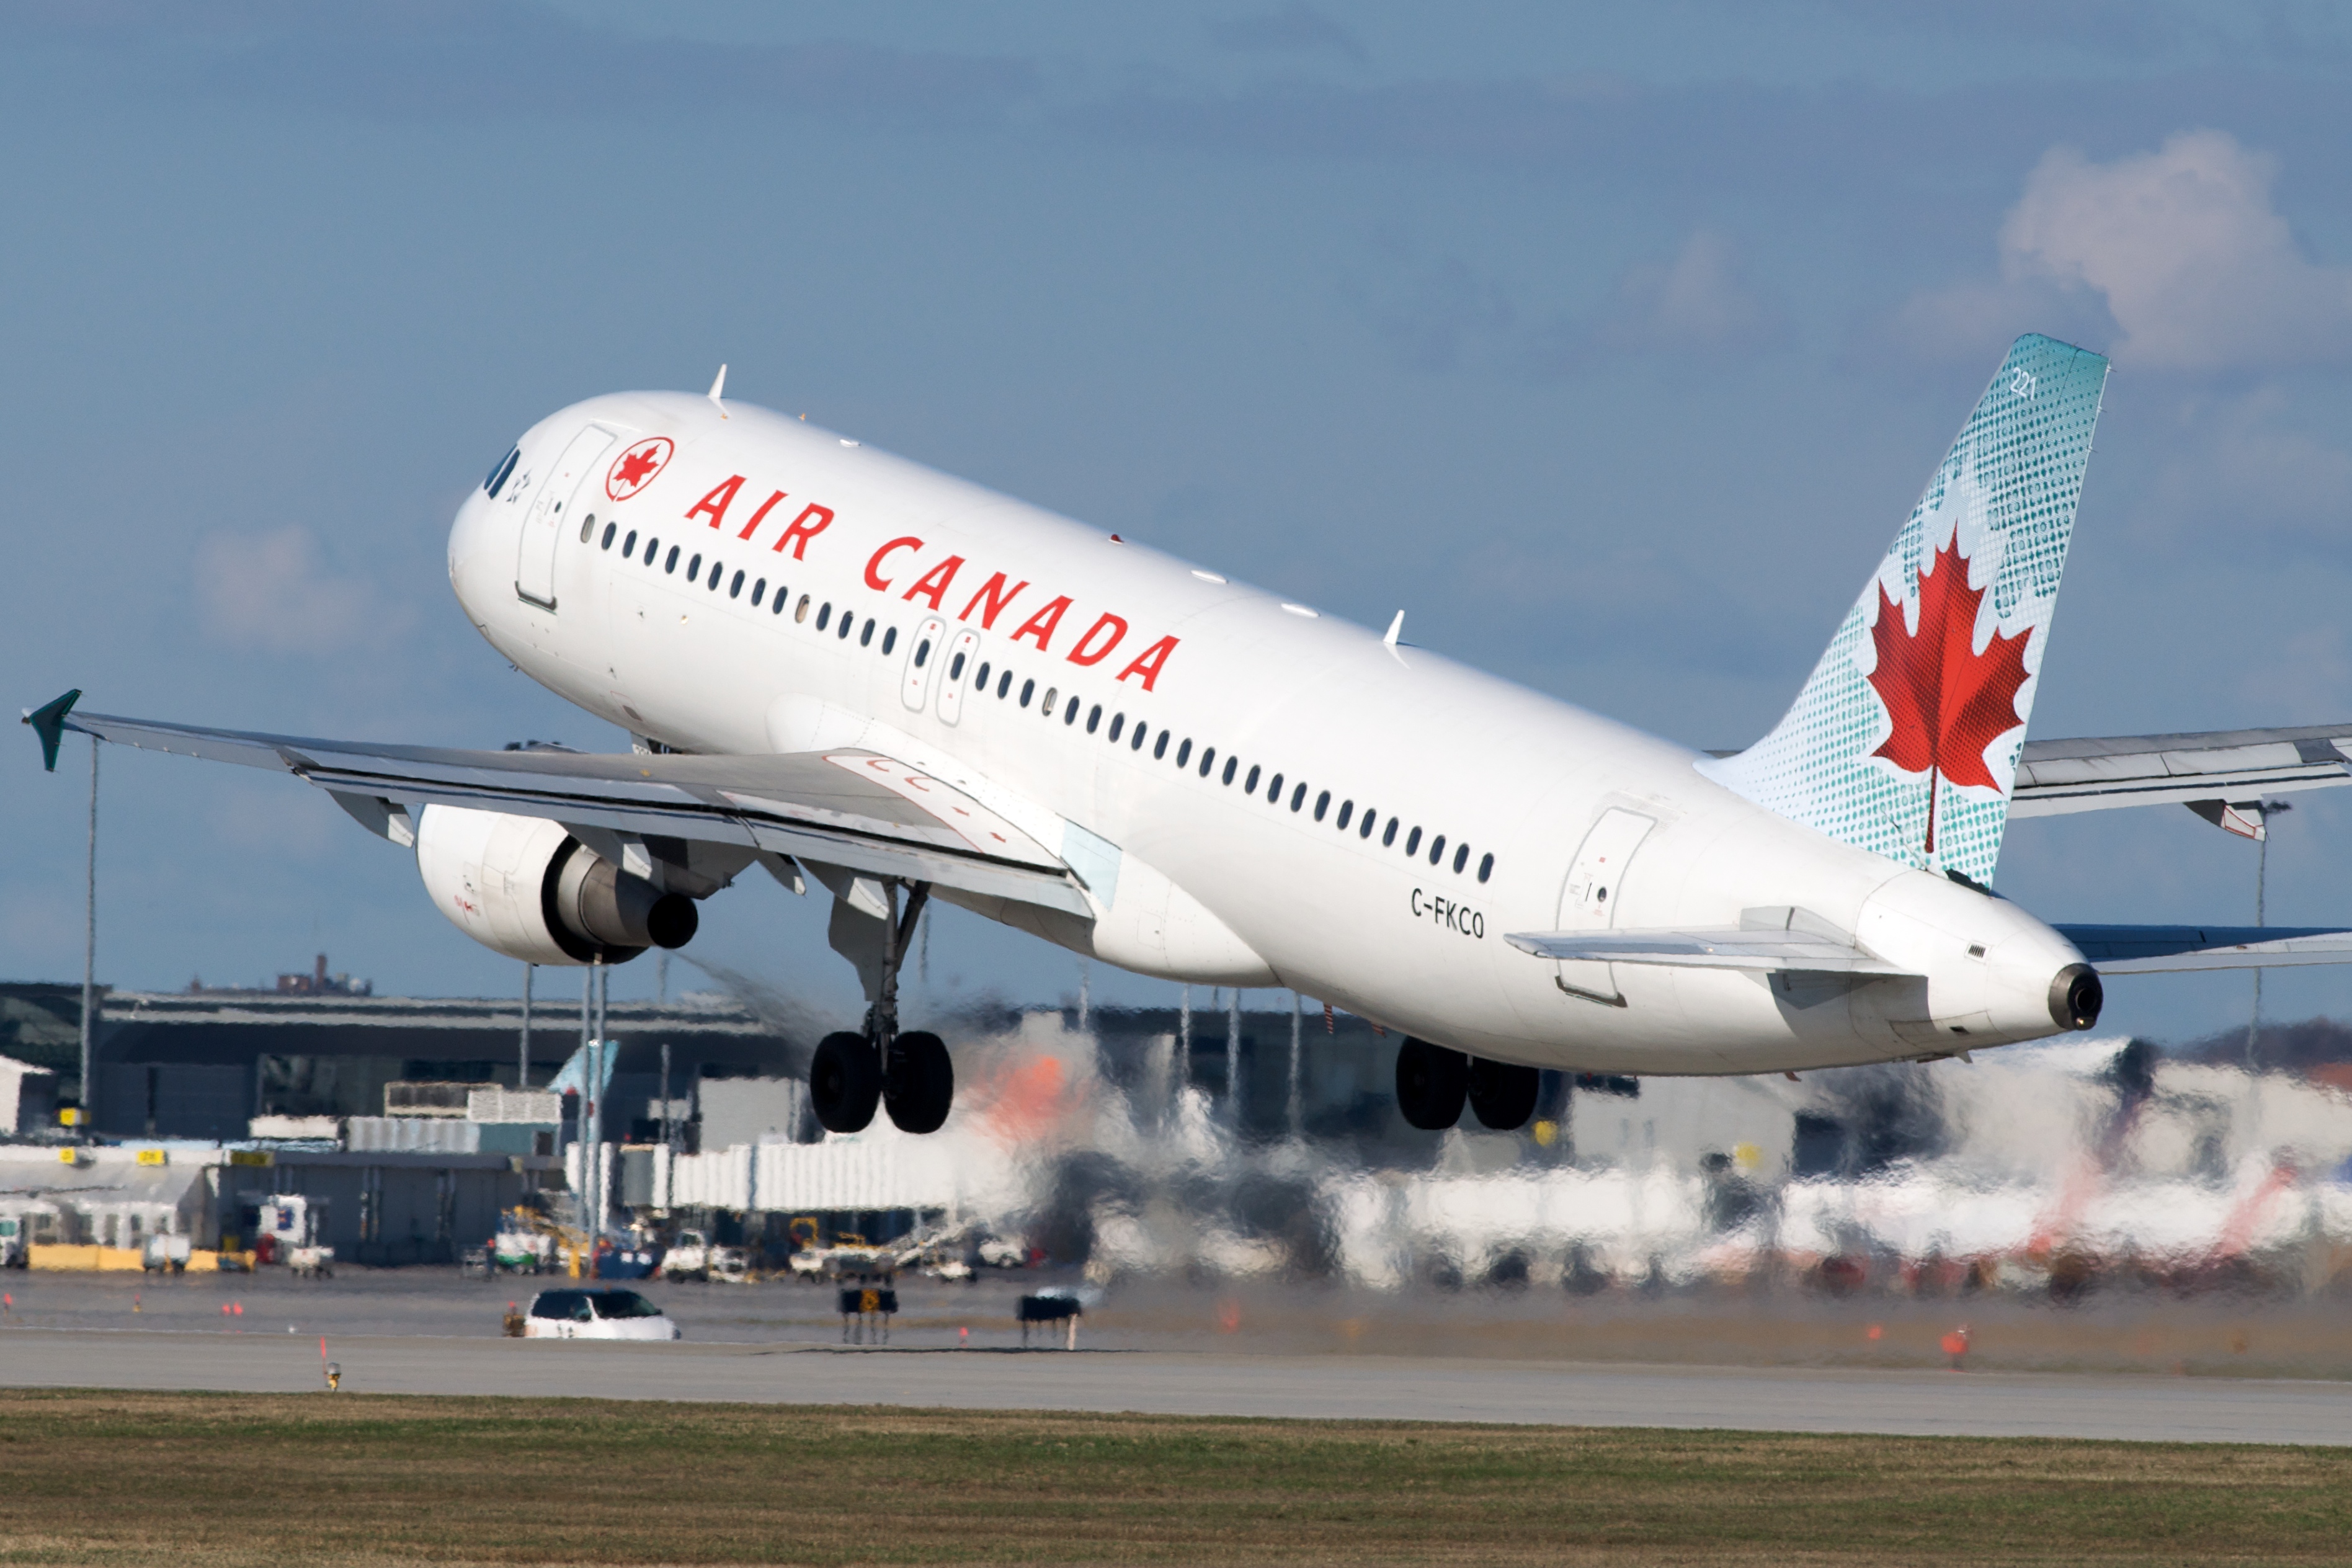 BRIEF-Air Canada Says 37 People Were Assessed & Released From Hospitals, Following Flight Diversion After Turbulence